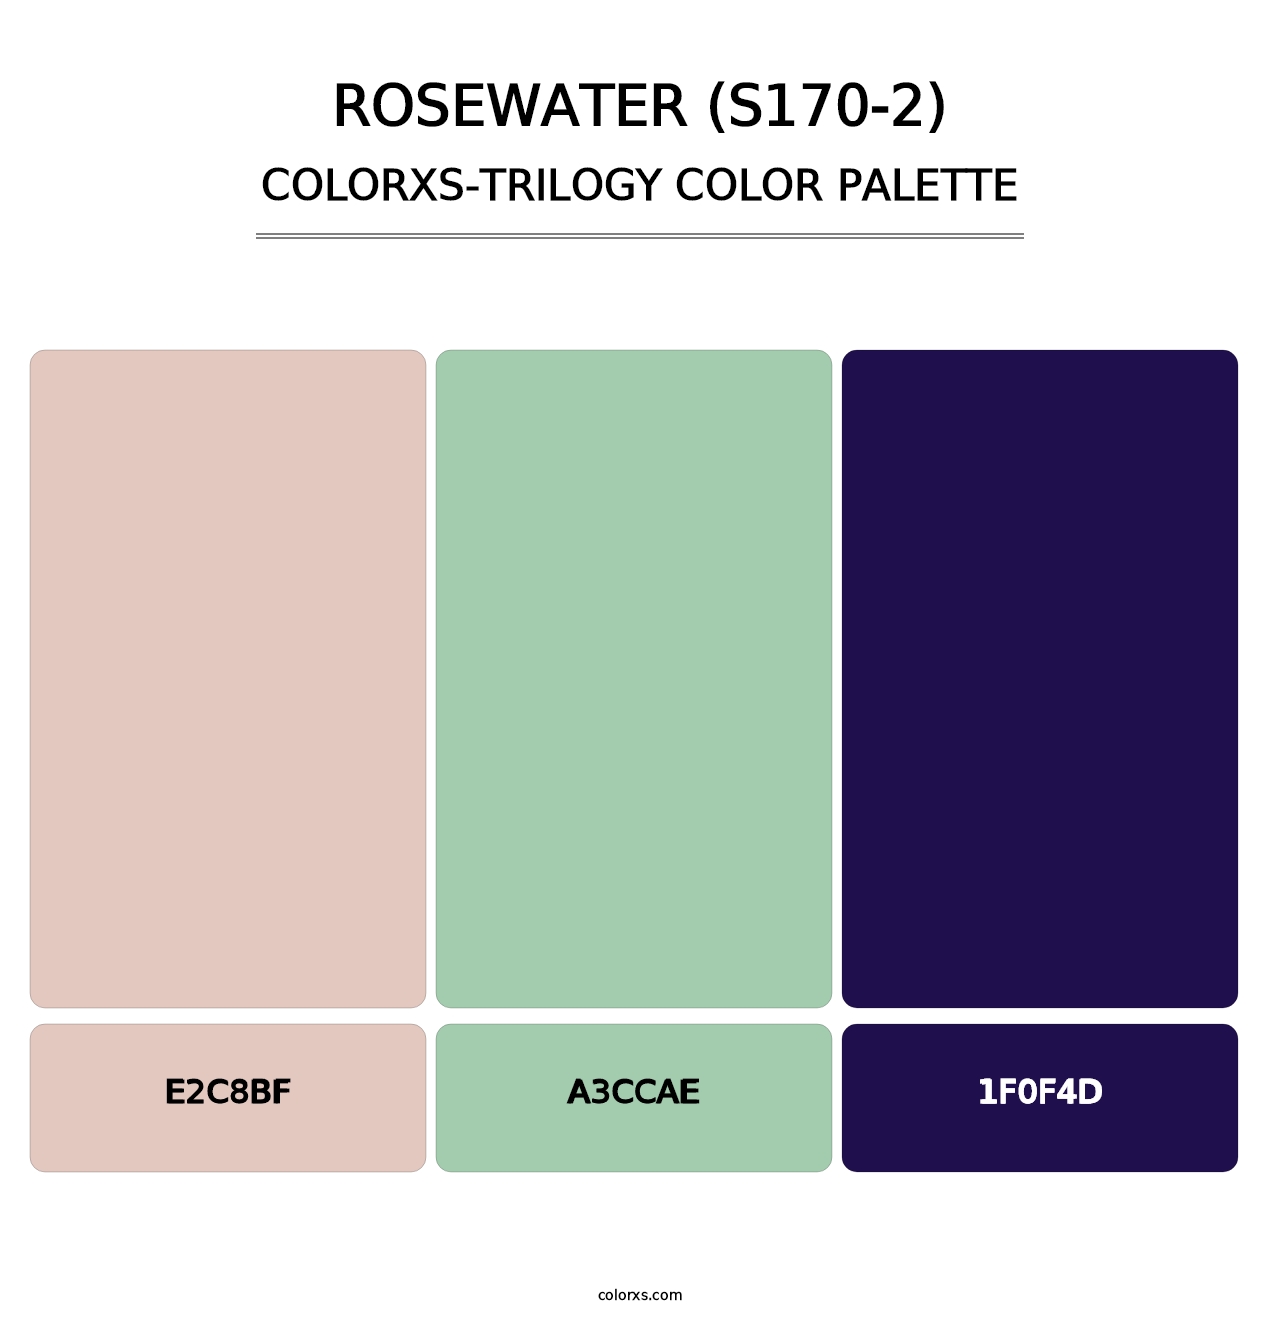 Rosewater (S170-2) - Colorxs Trilogy Palette